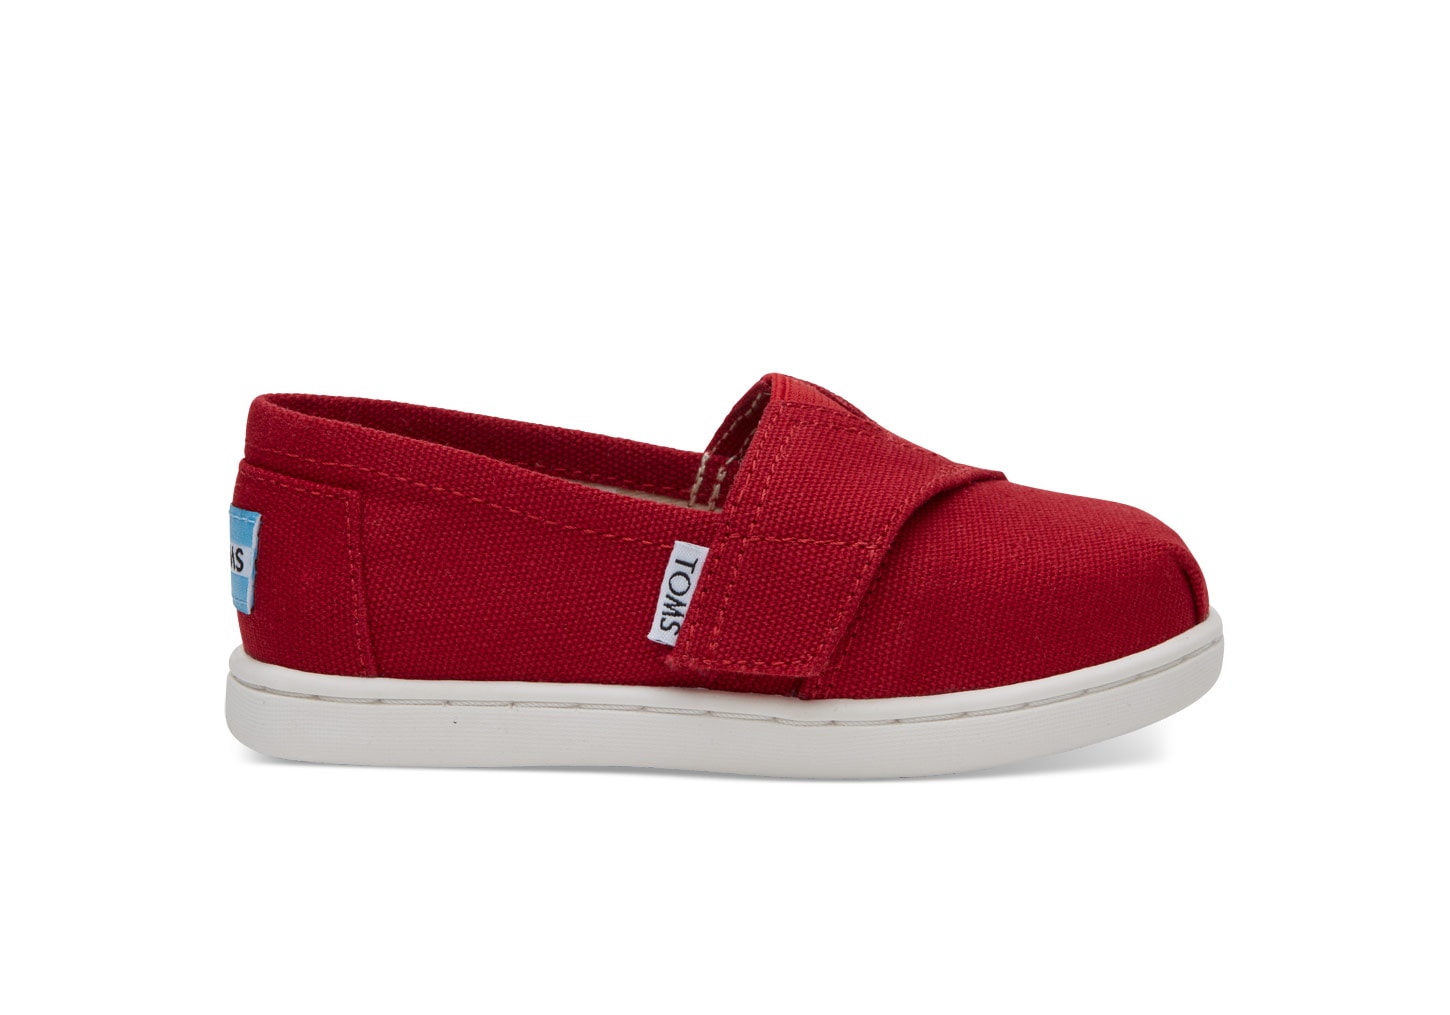 TOMS - Tiny Classics 2.0 Red Canvas Slip-Ons